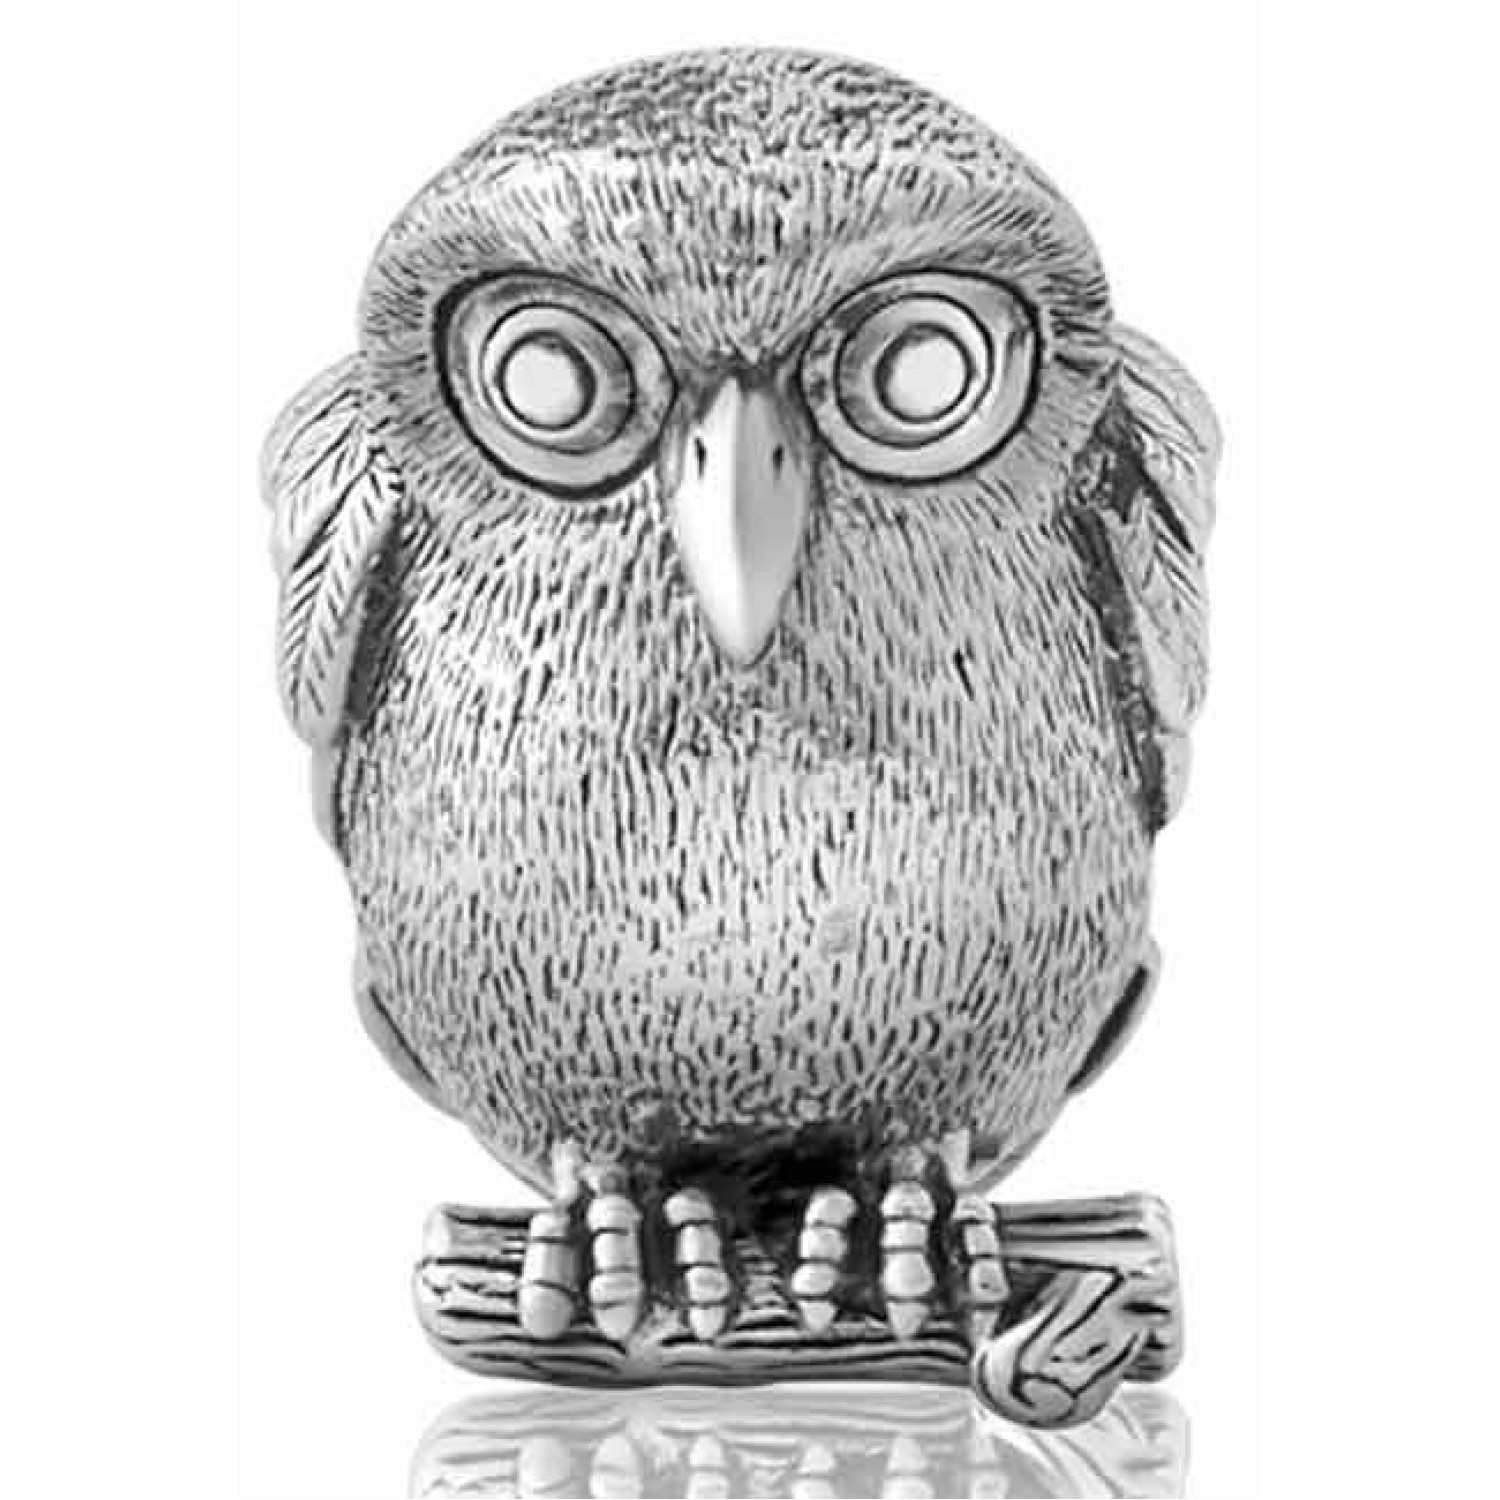 LK229 Evolve Ruru Charm (Morepork). A watchful guardian representing wisdom and knowledge, Ruru is the Maori name for the New Zealand native owl, the Morepork. With its large shining eyes and melancholy hooting call, the Ruru is widely admired and respect